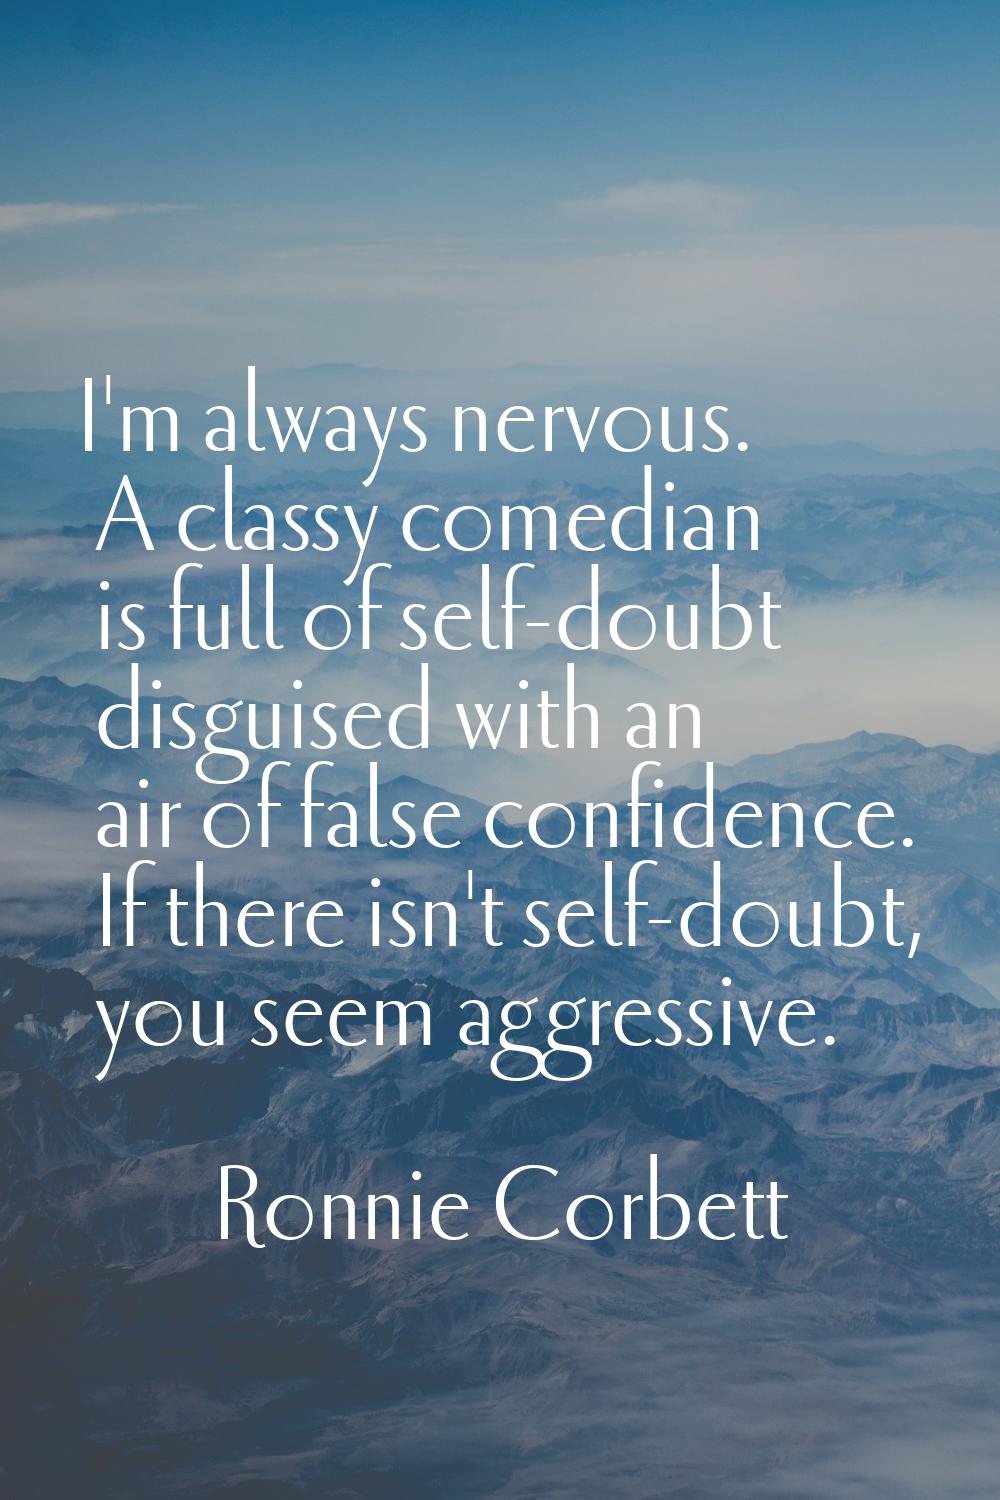 I'm always nervous. A classy comedian is full of self-doubt disguised with an air of false confiden